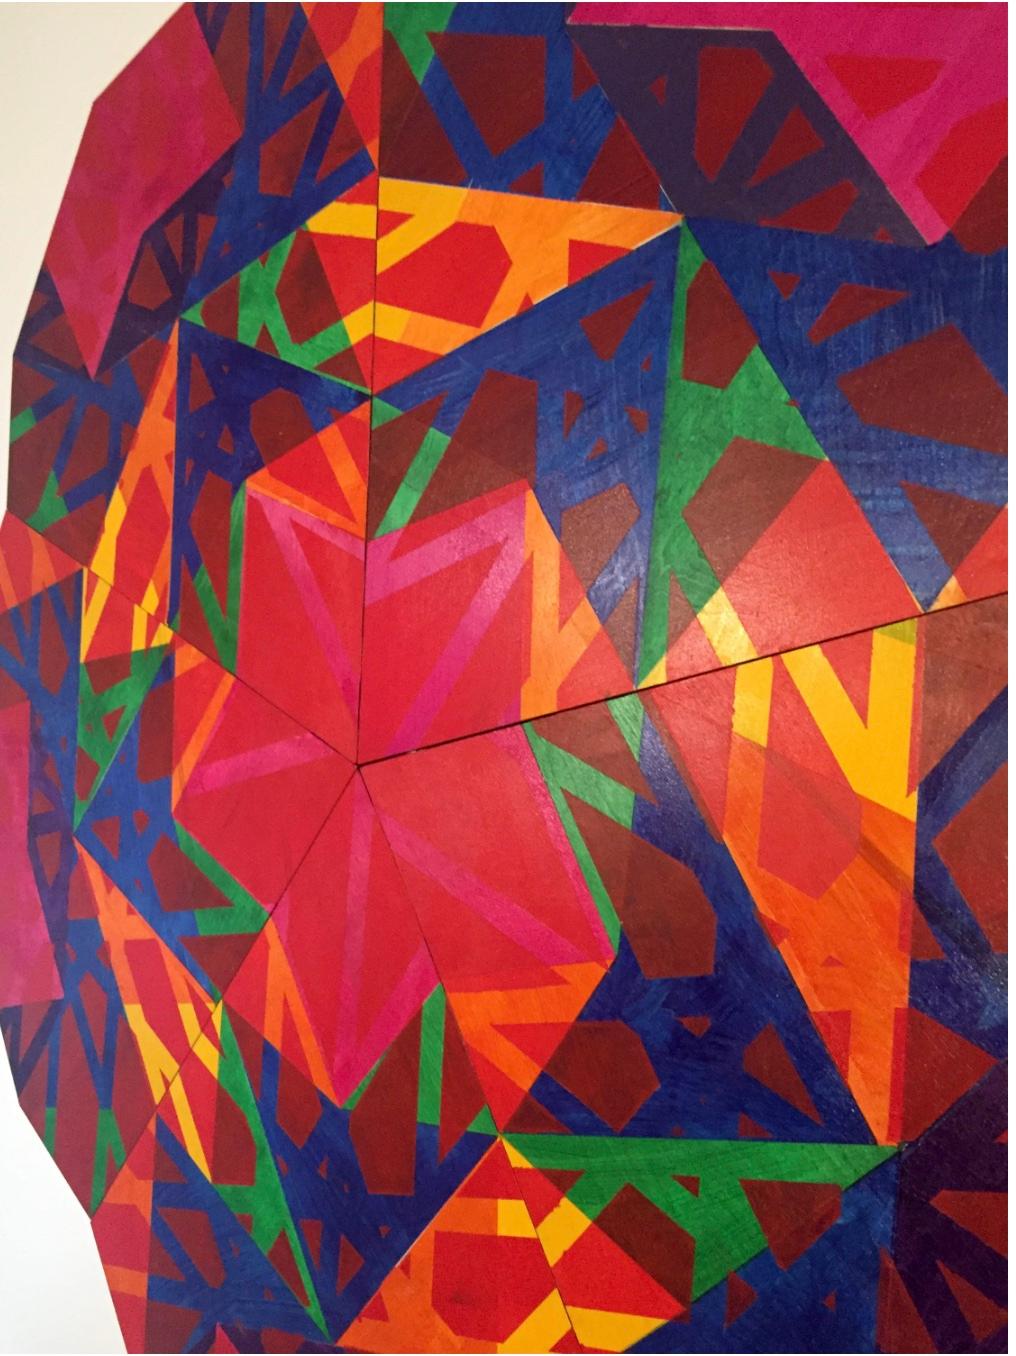 Acrylic on Lasercut wood 45 x 45 x 2 in (114.3 x 114.3 x 5.08 cm)

Christine Romanell was born in Paterson, NJ. Her work focuses on aperiodic patterns as they relate to the underlying structures of reality. She sets up systems of interference that